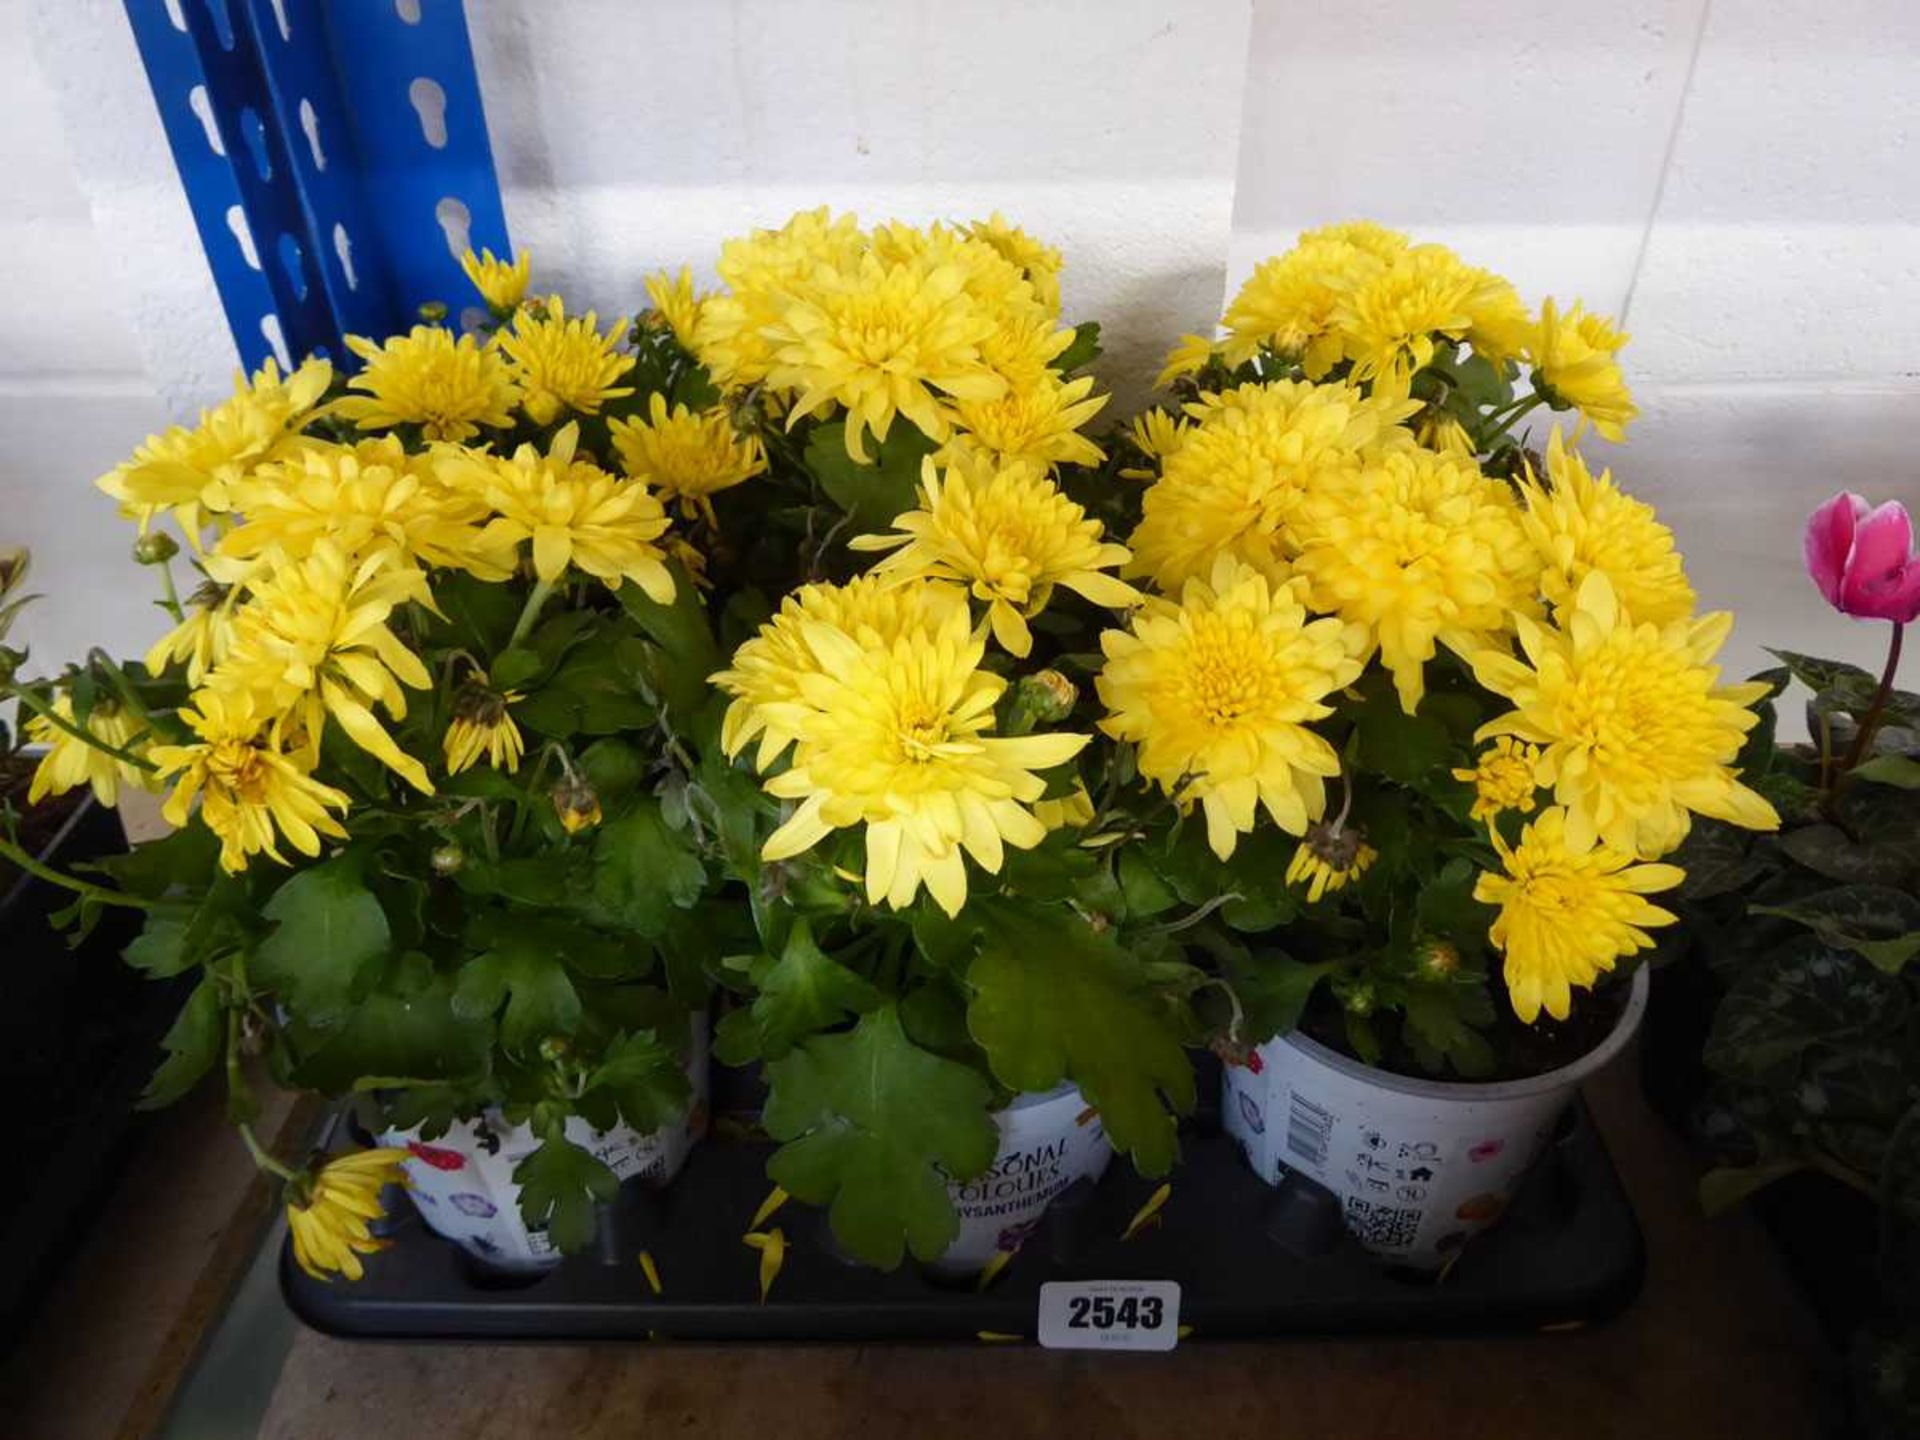 Tray containing 6 potted yellow flowering chrysanthemums